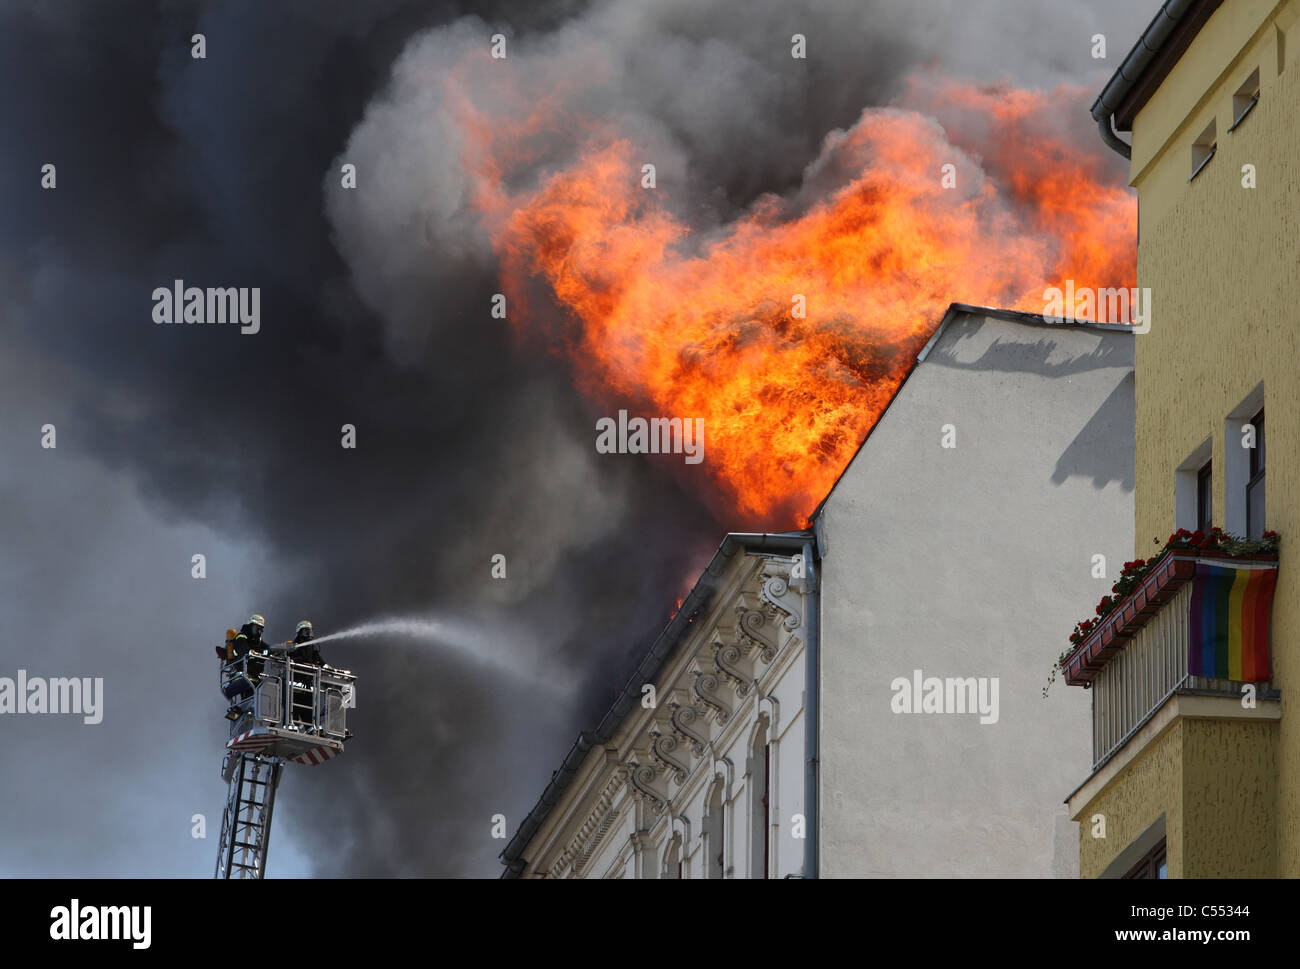 Firefighters putting out a fire in a burning house, Berlin, Germany Stock Photo